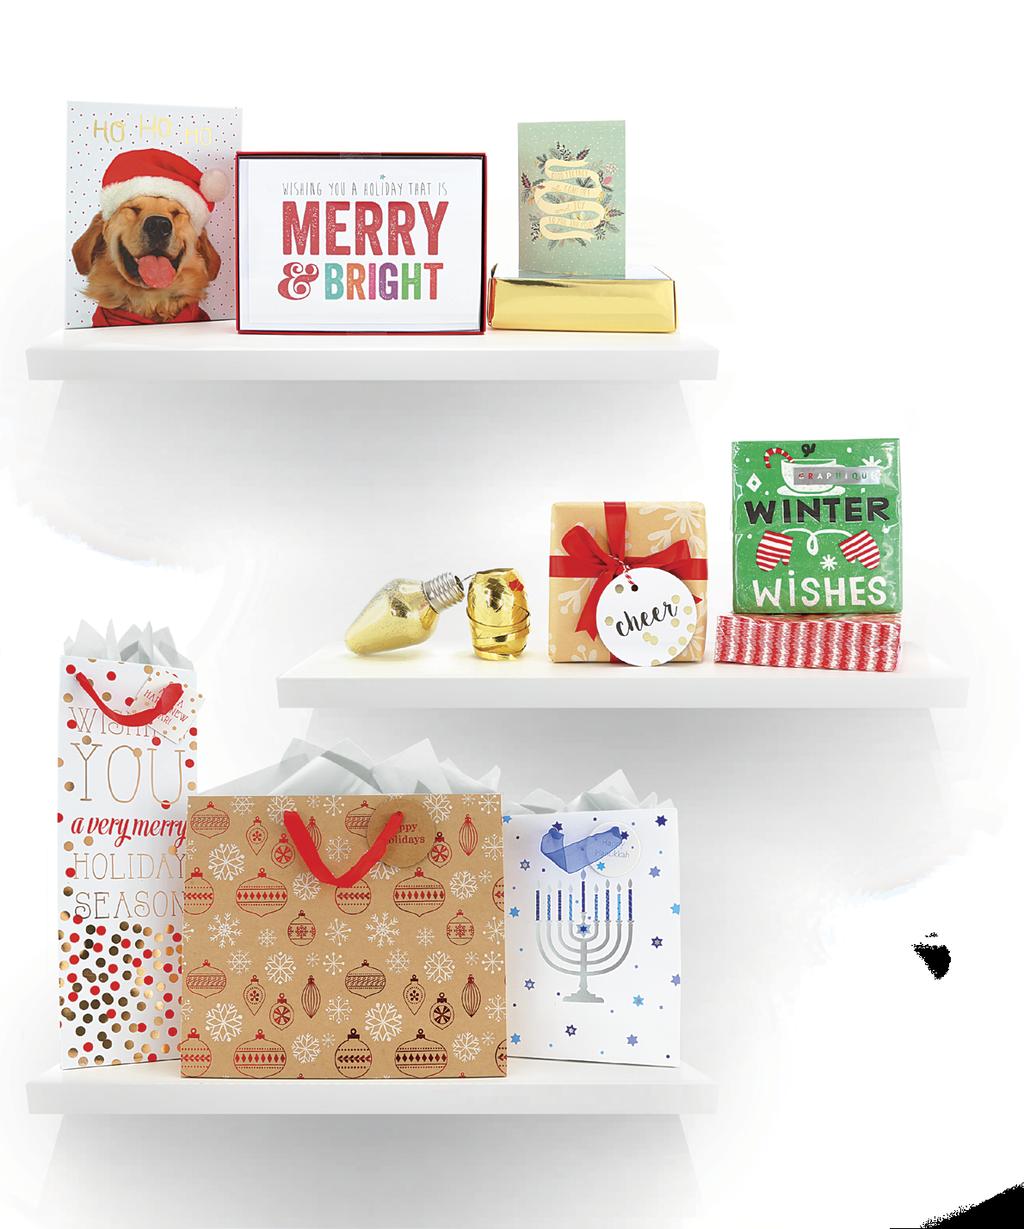 EARLY BUY OFFER OR DER BY M A RCH 1 {2016 Graphique Holiday Collection} Boxed Cards 5% DISCOUNT ON WHOLESALE ORDERS OVER $300 {Must specify promotion code: CSP} Napkins & Gift